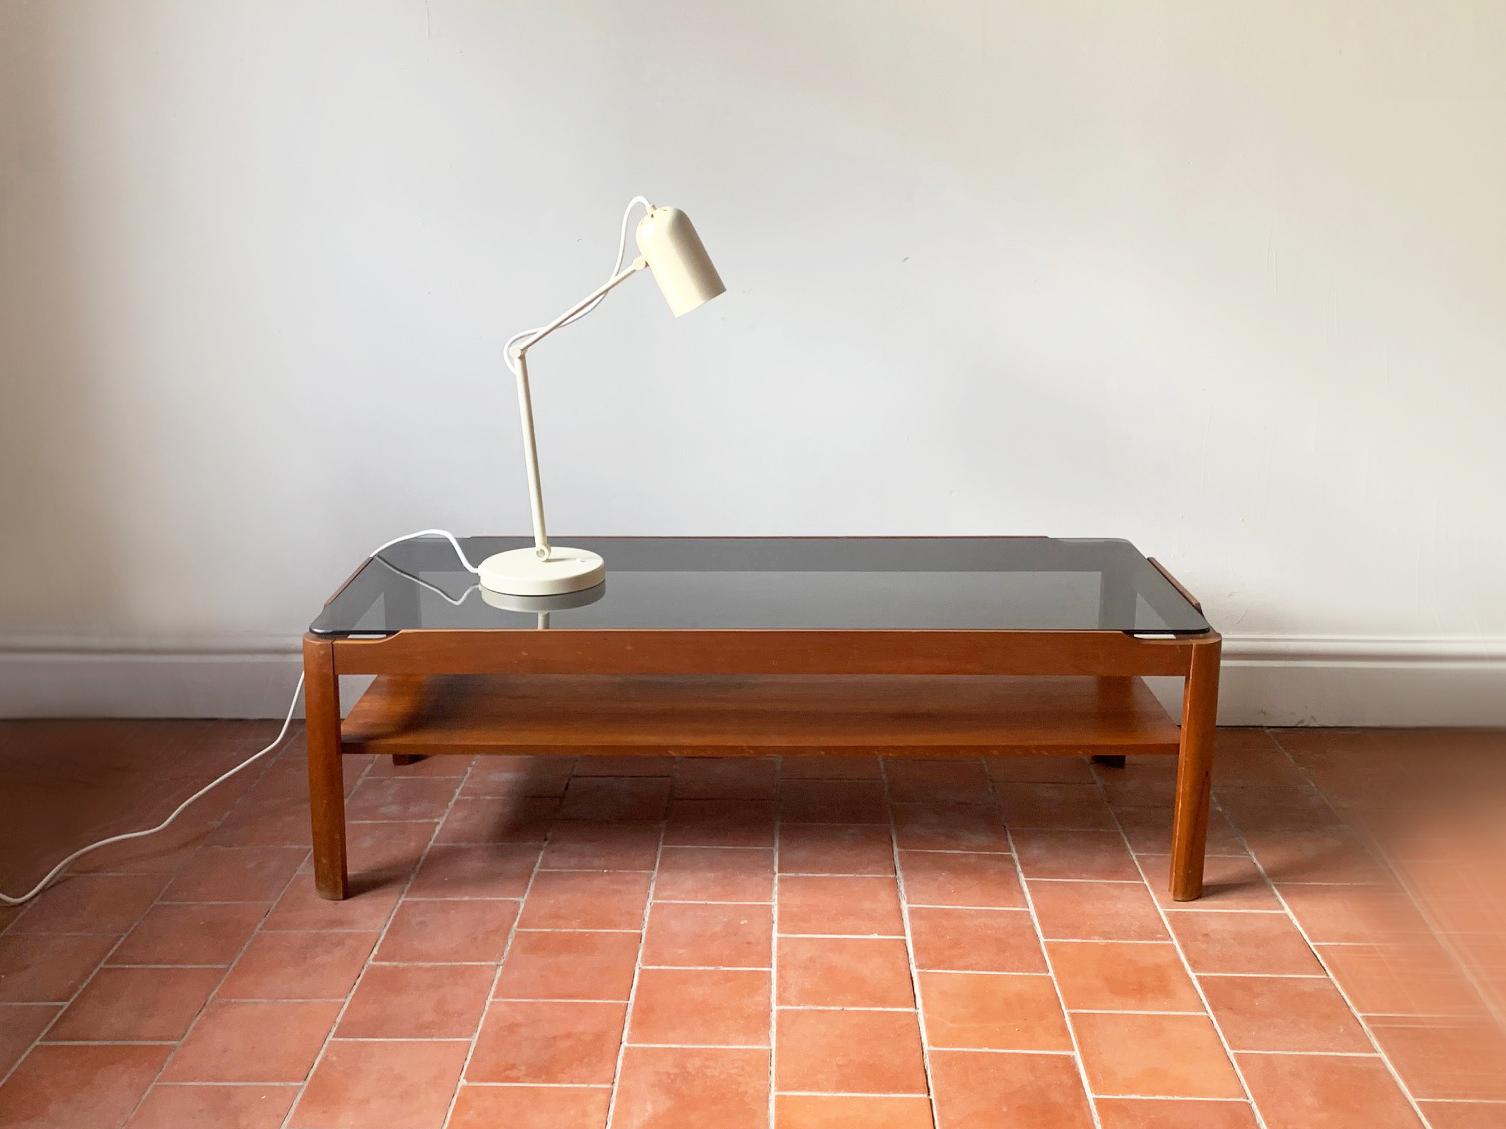 Mid century modern coffee table by respected English maker ‘Myer’. Solid countered teak frame with thick smoked glass insert

Size 
Width 112cm x depth 48cm x height 35cm

Condition:
Very good mid century condition. Minor signs of wear consistent